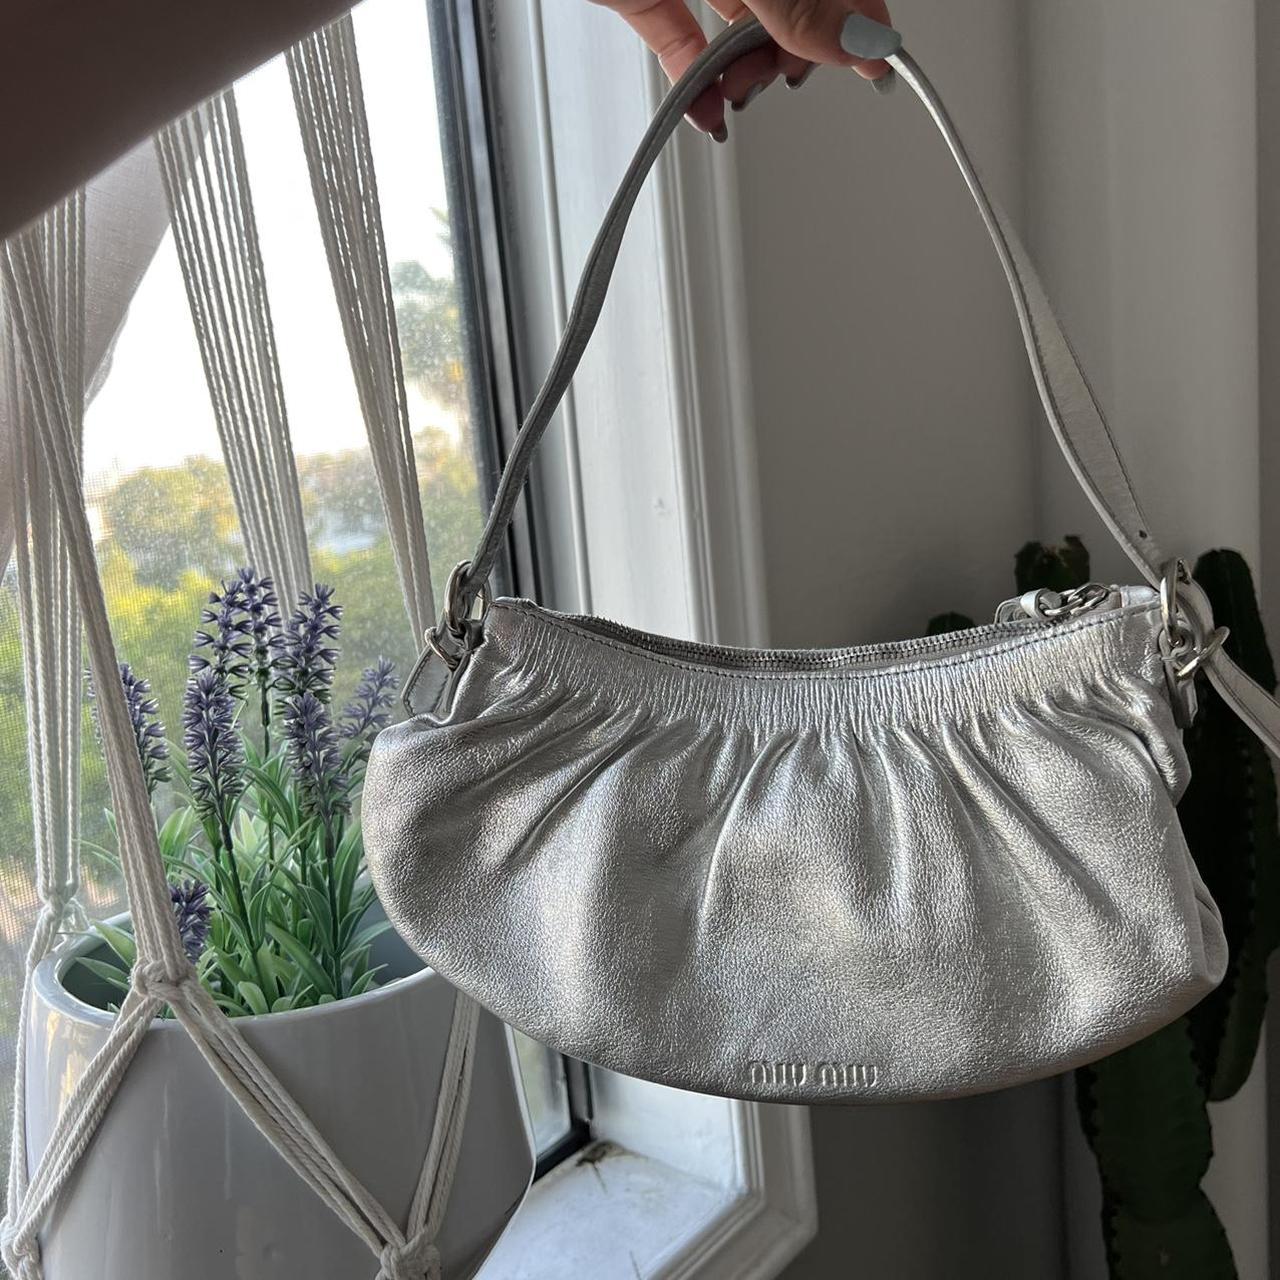 After yesterday's heated debate about brands we like and dislike - let's  discuss something everyone can agree on: the joy you find in a new or old  bag! What's your newest addition